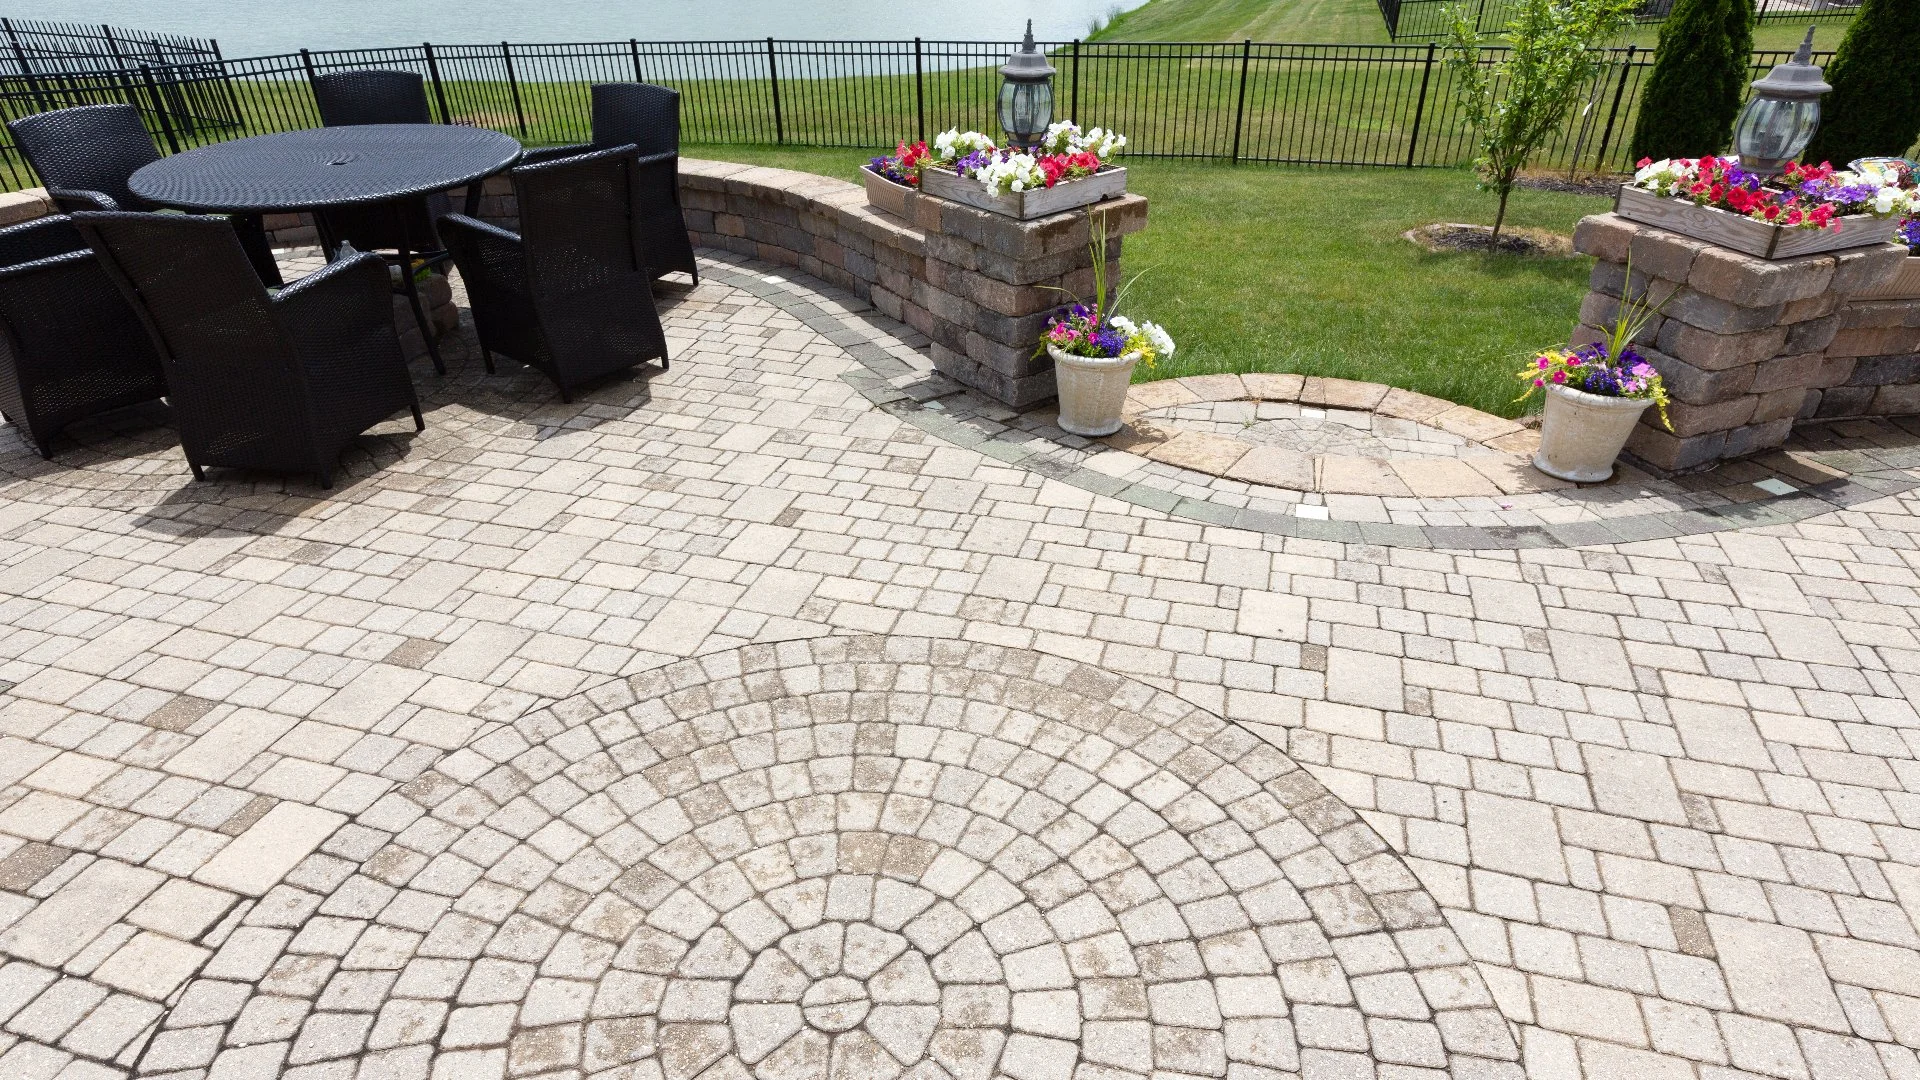 Make Sure to Use Pavers When Building Your New Patio in Omaha, NE!